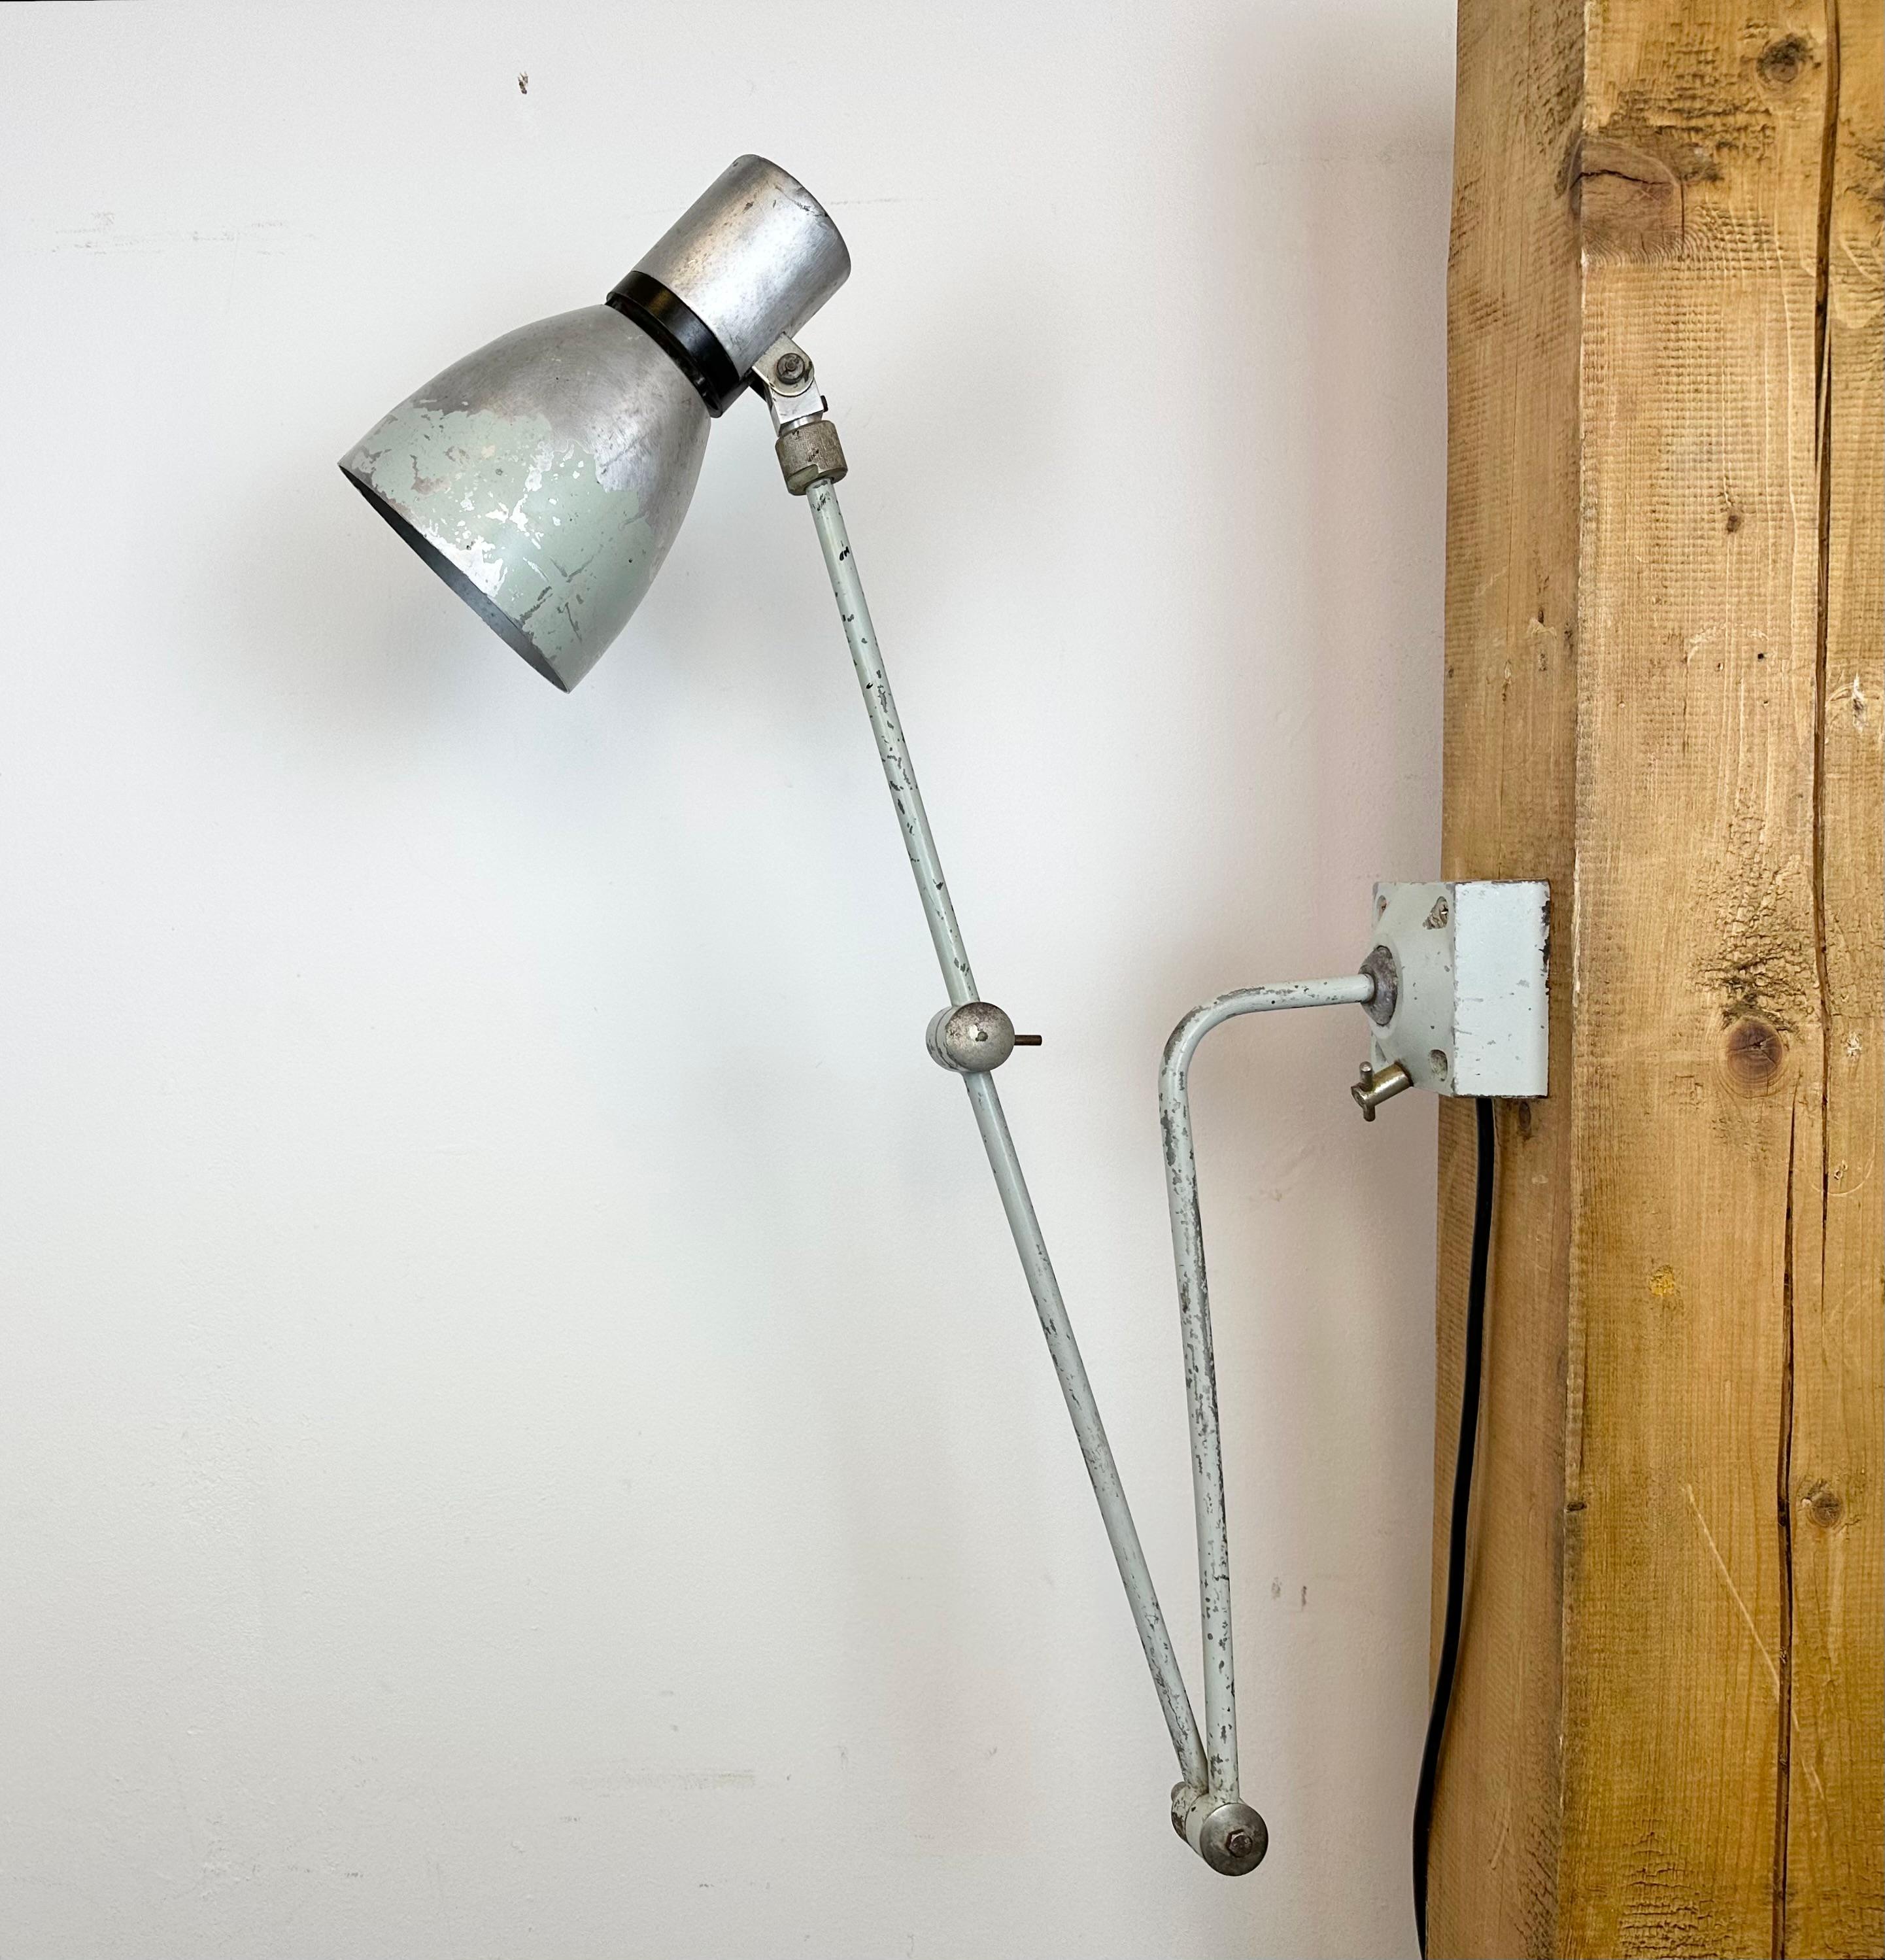 Industrial wall light made by Elektrosvit in former Czechoslovakia during the 1970s. It features an iron base, an iron arm with three adjustable joints and aluminium shade with original switch on the top. The socket requires standard E 27 / E26